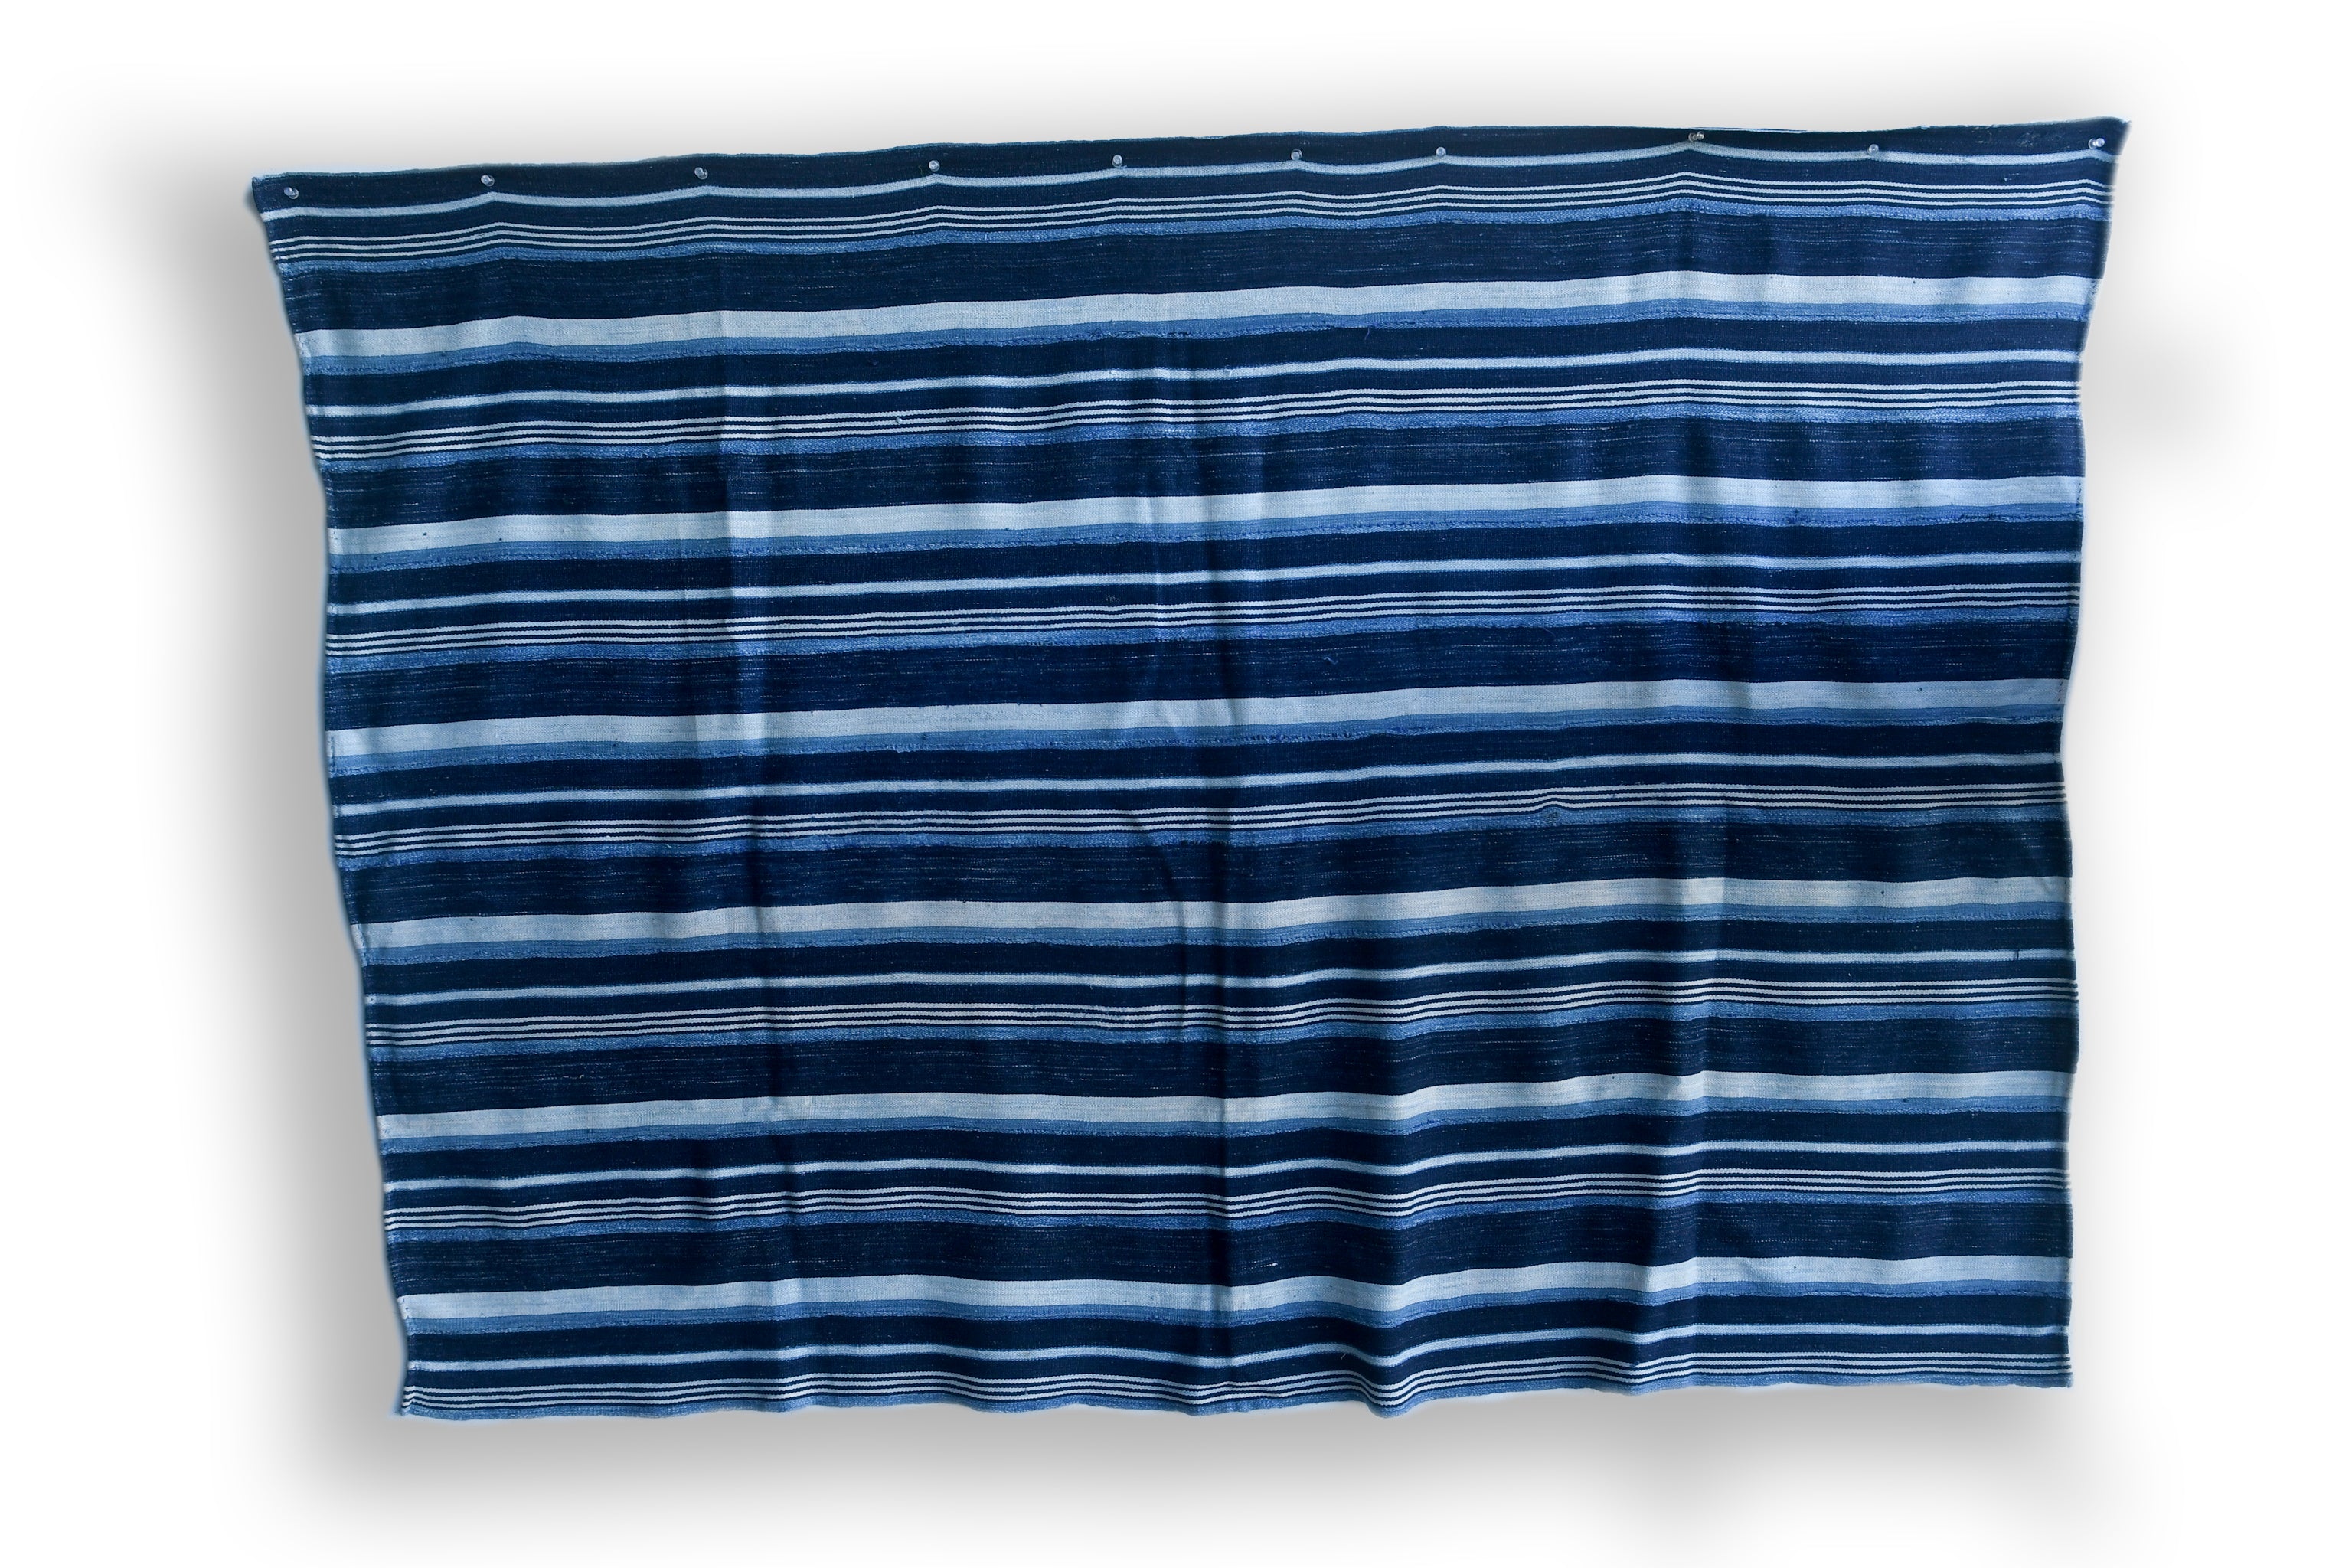 Handcrafted Textiles - Handmade - Contemporary - African Art - Home Decor - Living - Striped Textile - Vintage African Cotton material - Indigo Dyed design - Home Decor Accent - Bold Touch - Living Space